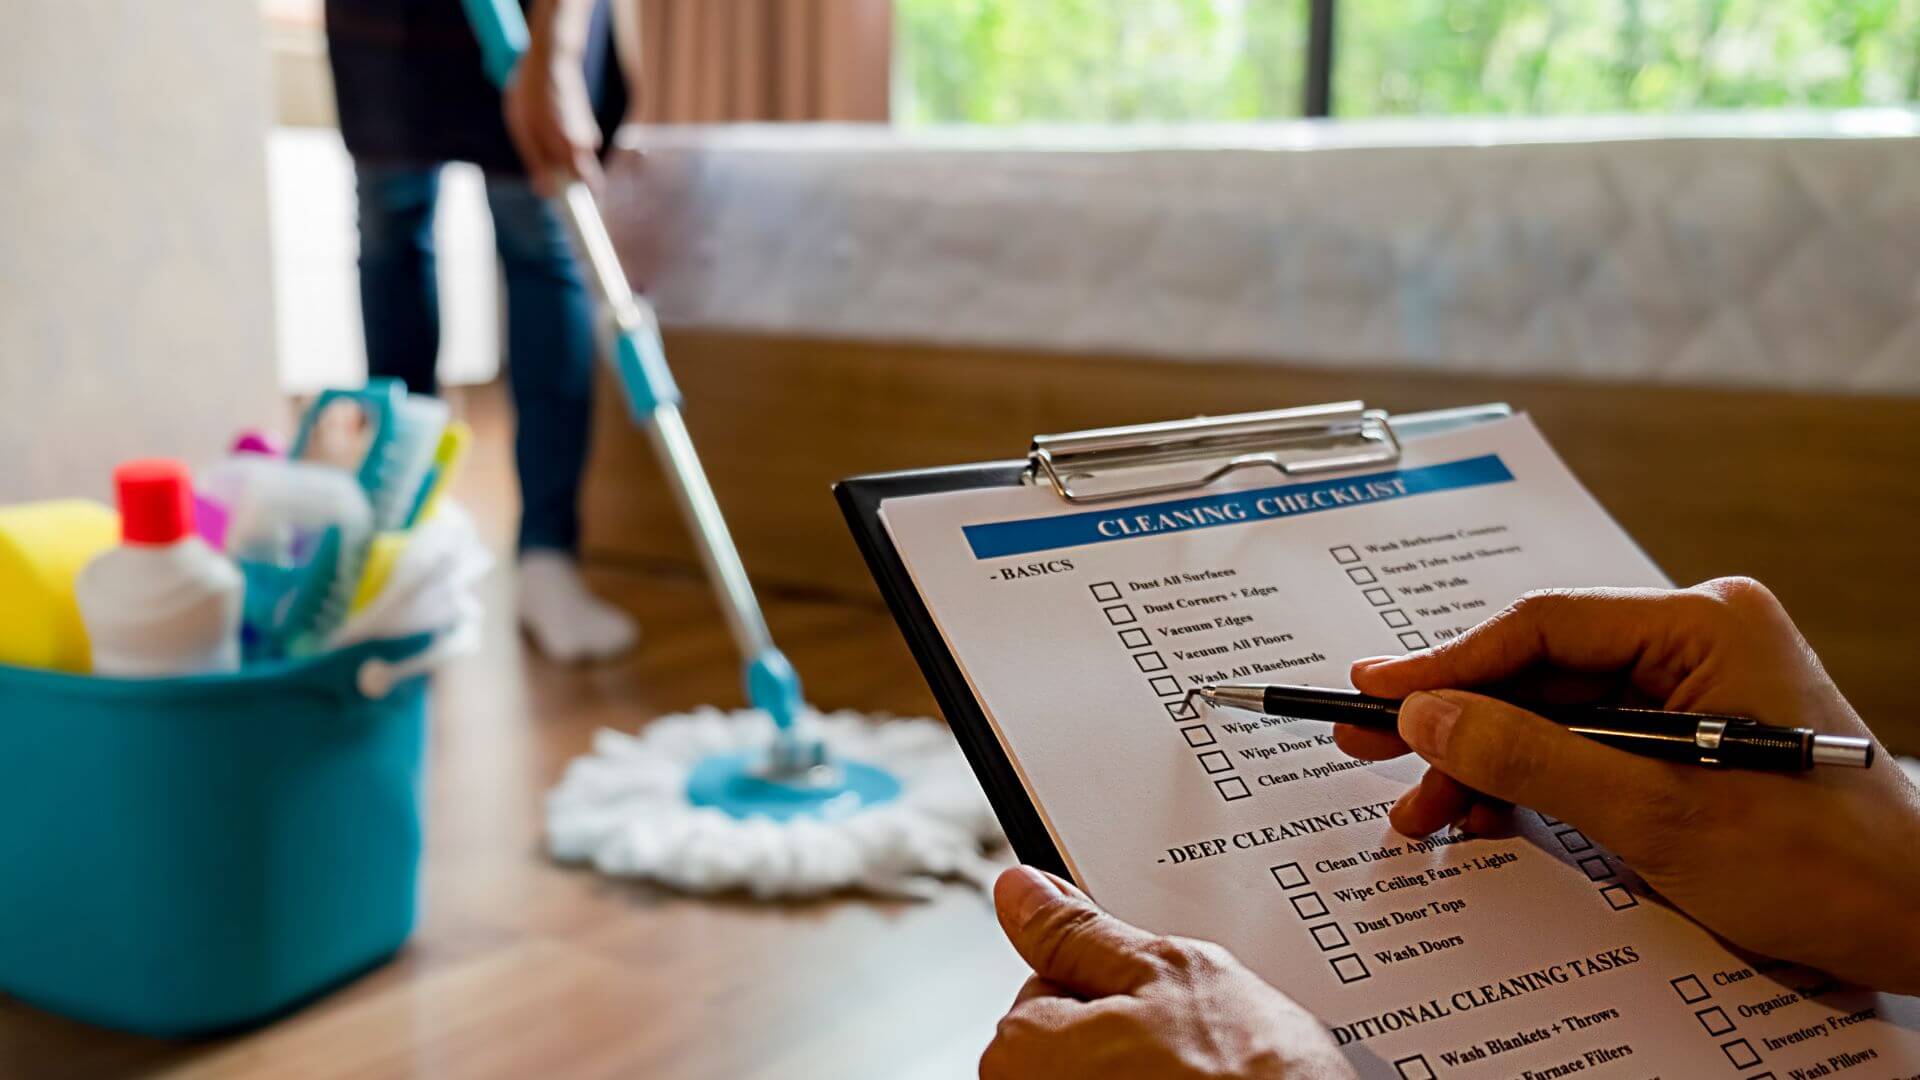 A person is holding a checklist titled "Cleaning Checklist," reviewing the tasks while another individual cleans the floor with a mop in the background. Cleaning supplies are visible in a bucket nearby, creating a clear focus on the importance of thorough end-of-lease cleaning to ensure all tasks are completed and the property is left in top condition.